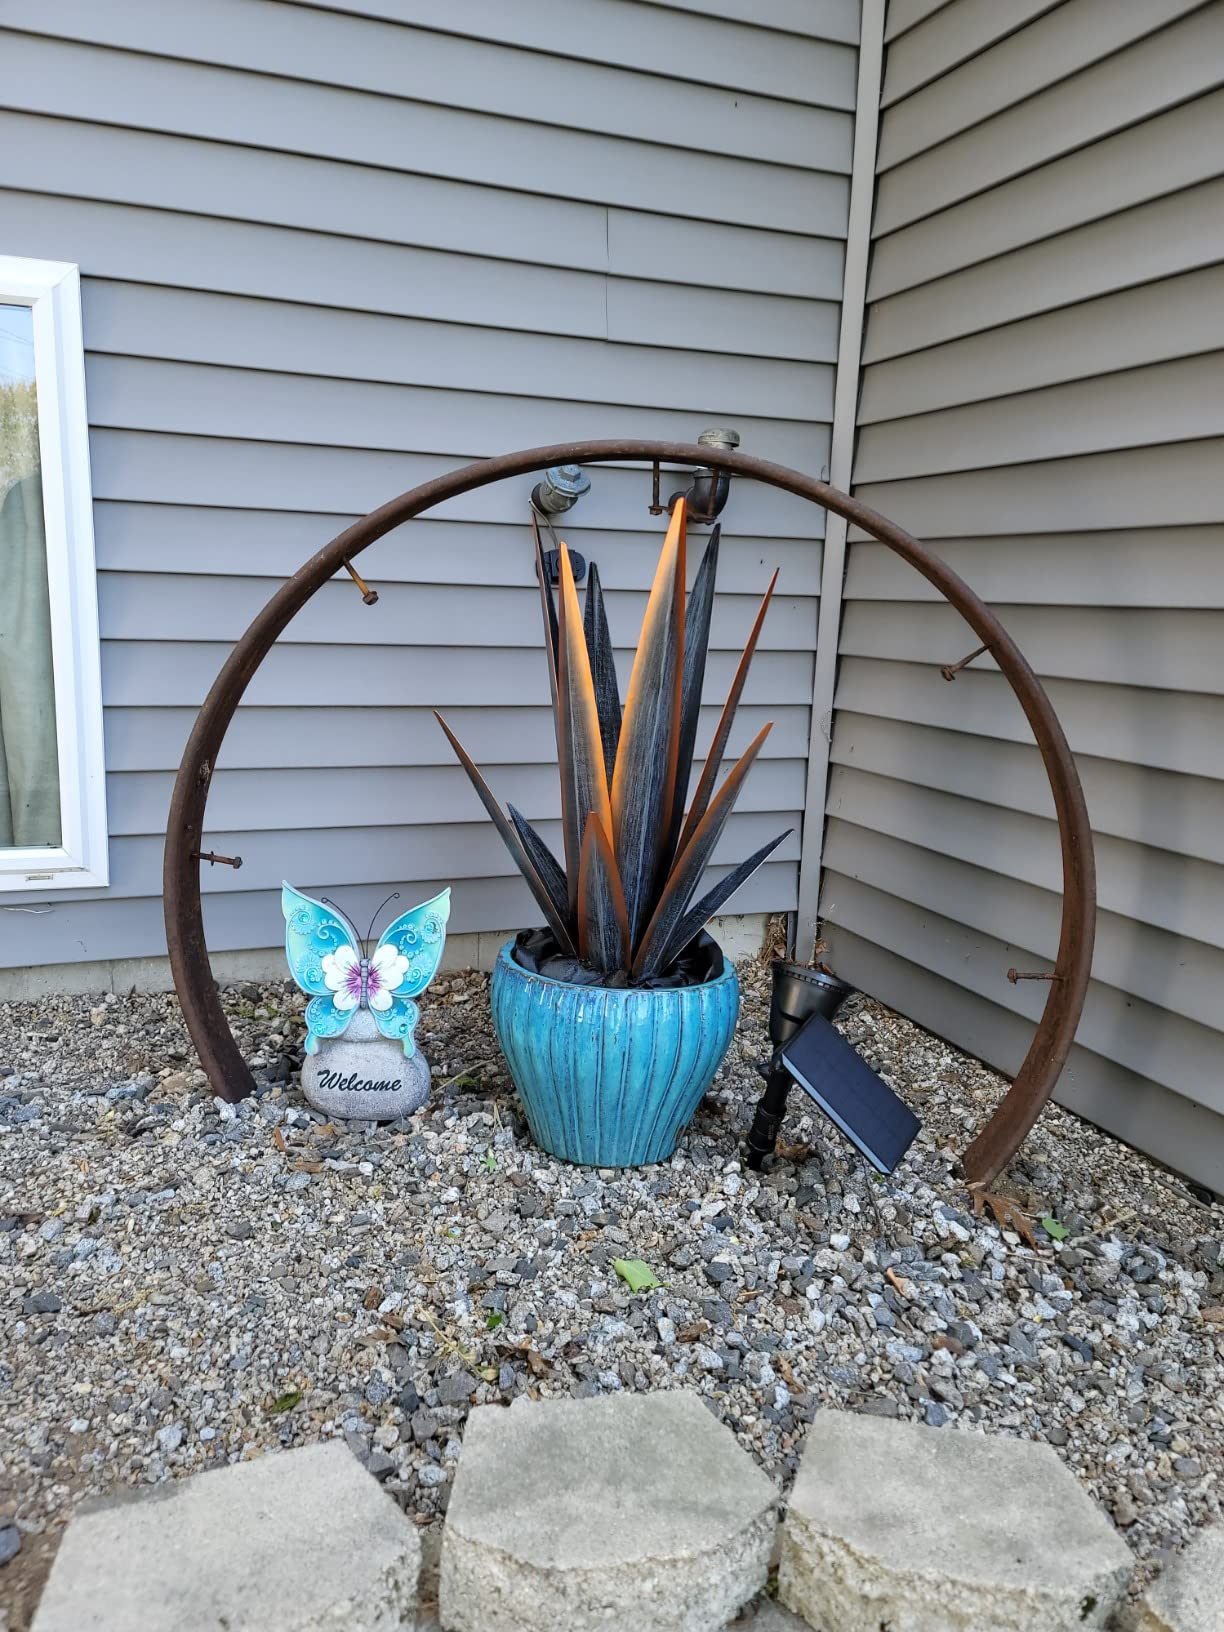 Metal Agave Plant Sculpture for Outdoor Patio Garden photo review